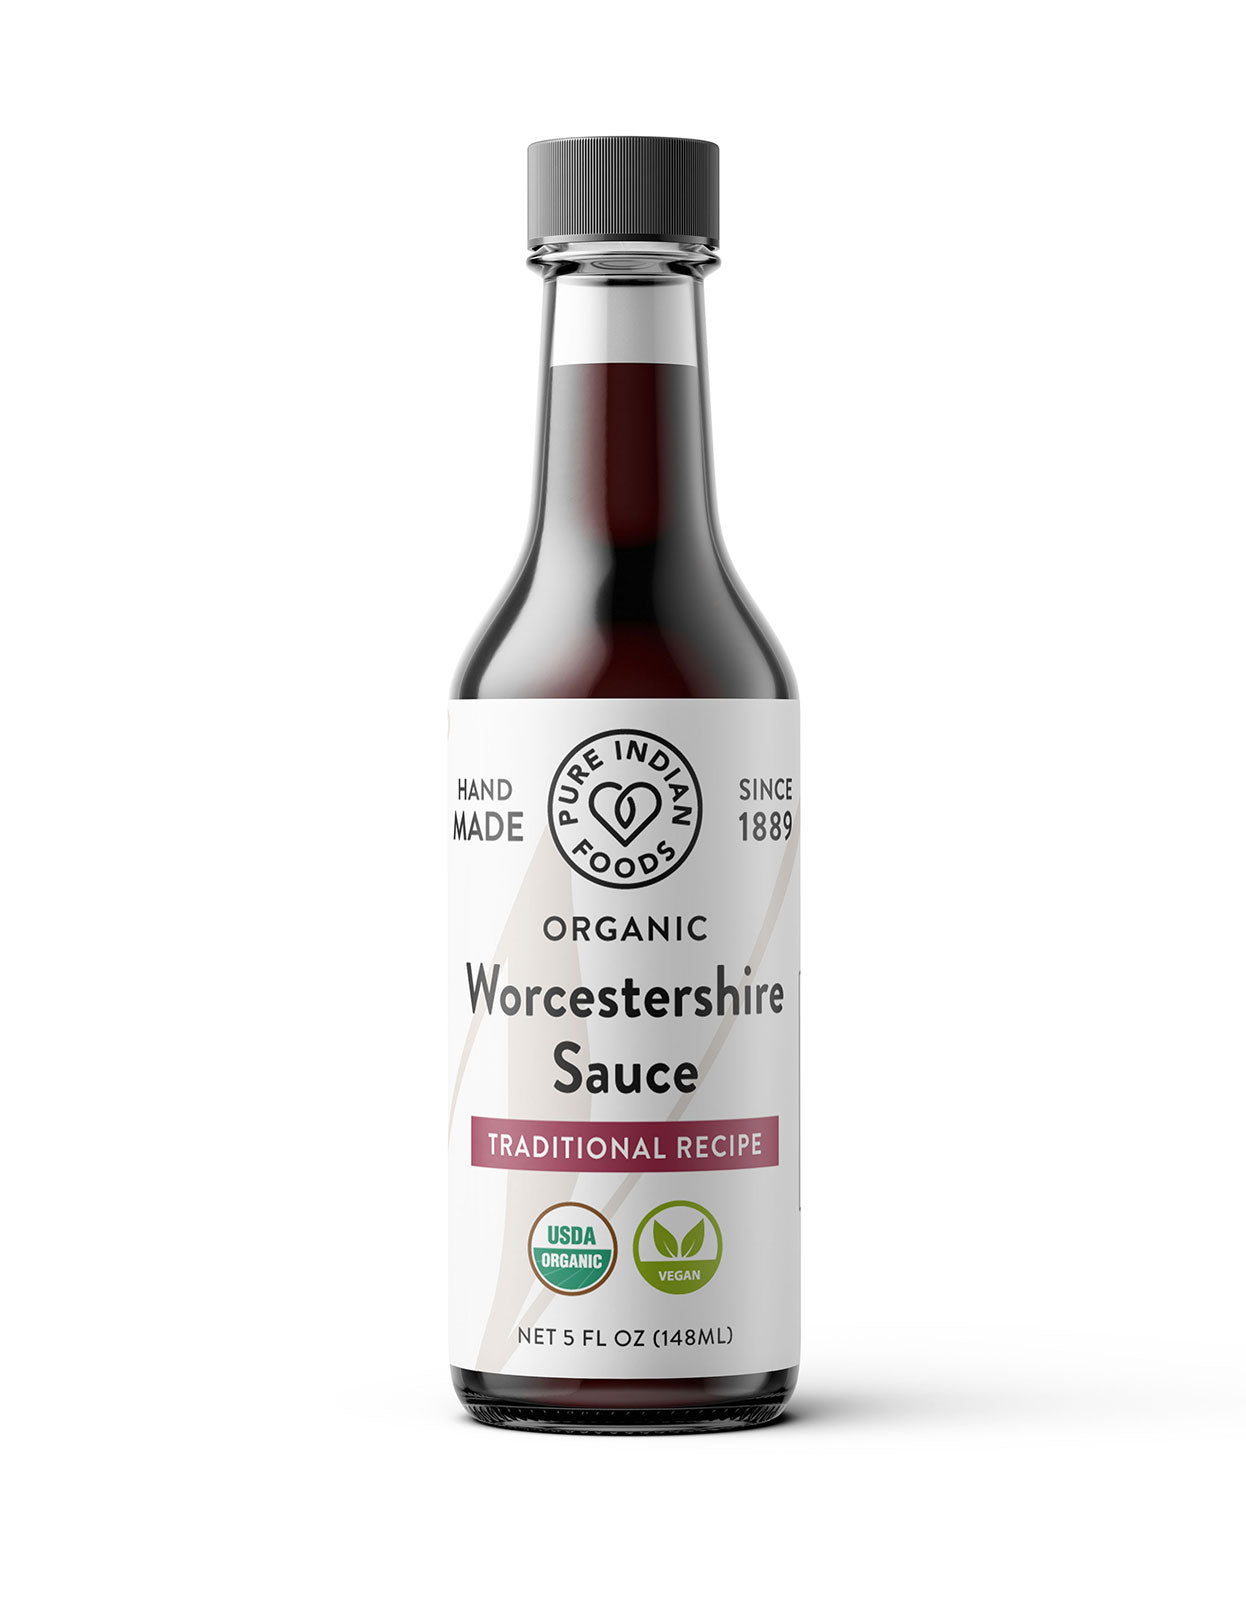 Bottle of Organic Worcestershire Sauce from Pure Indian Foods. Gluten-free.